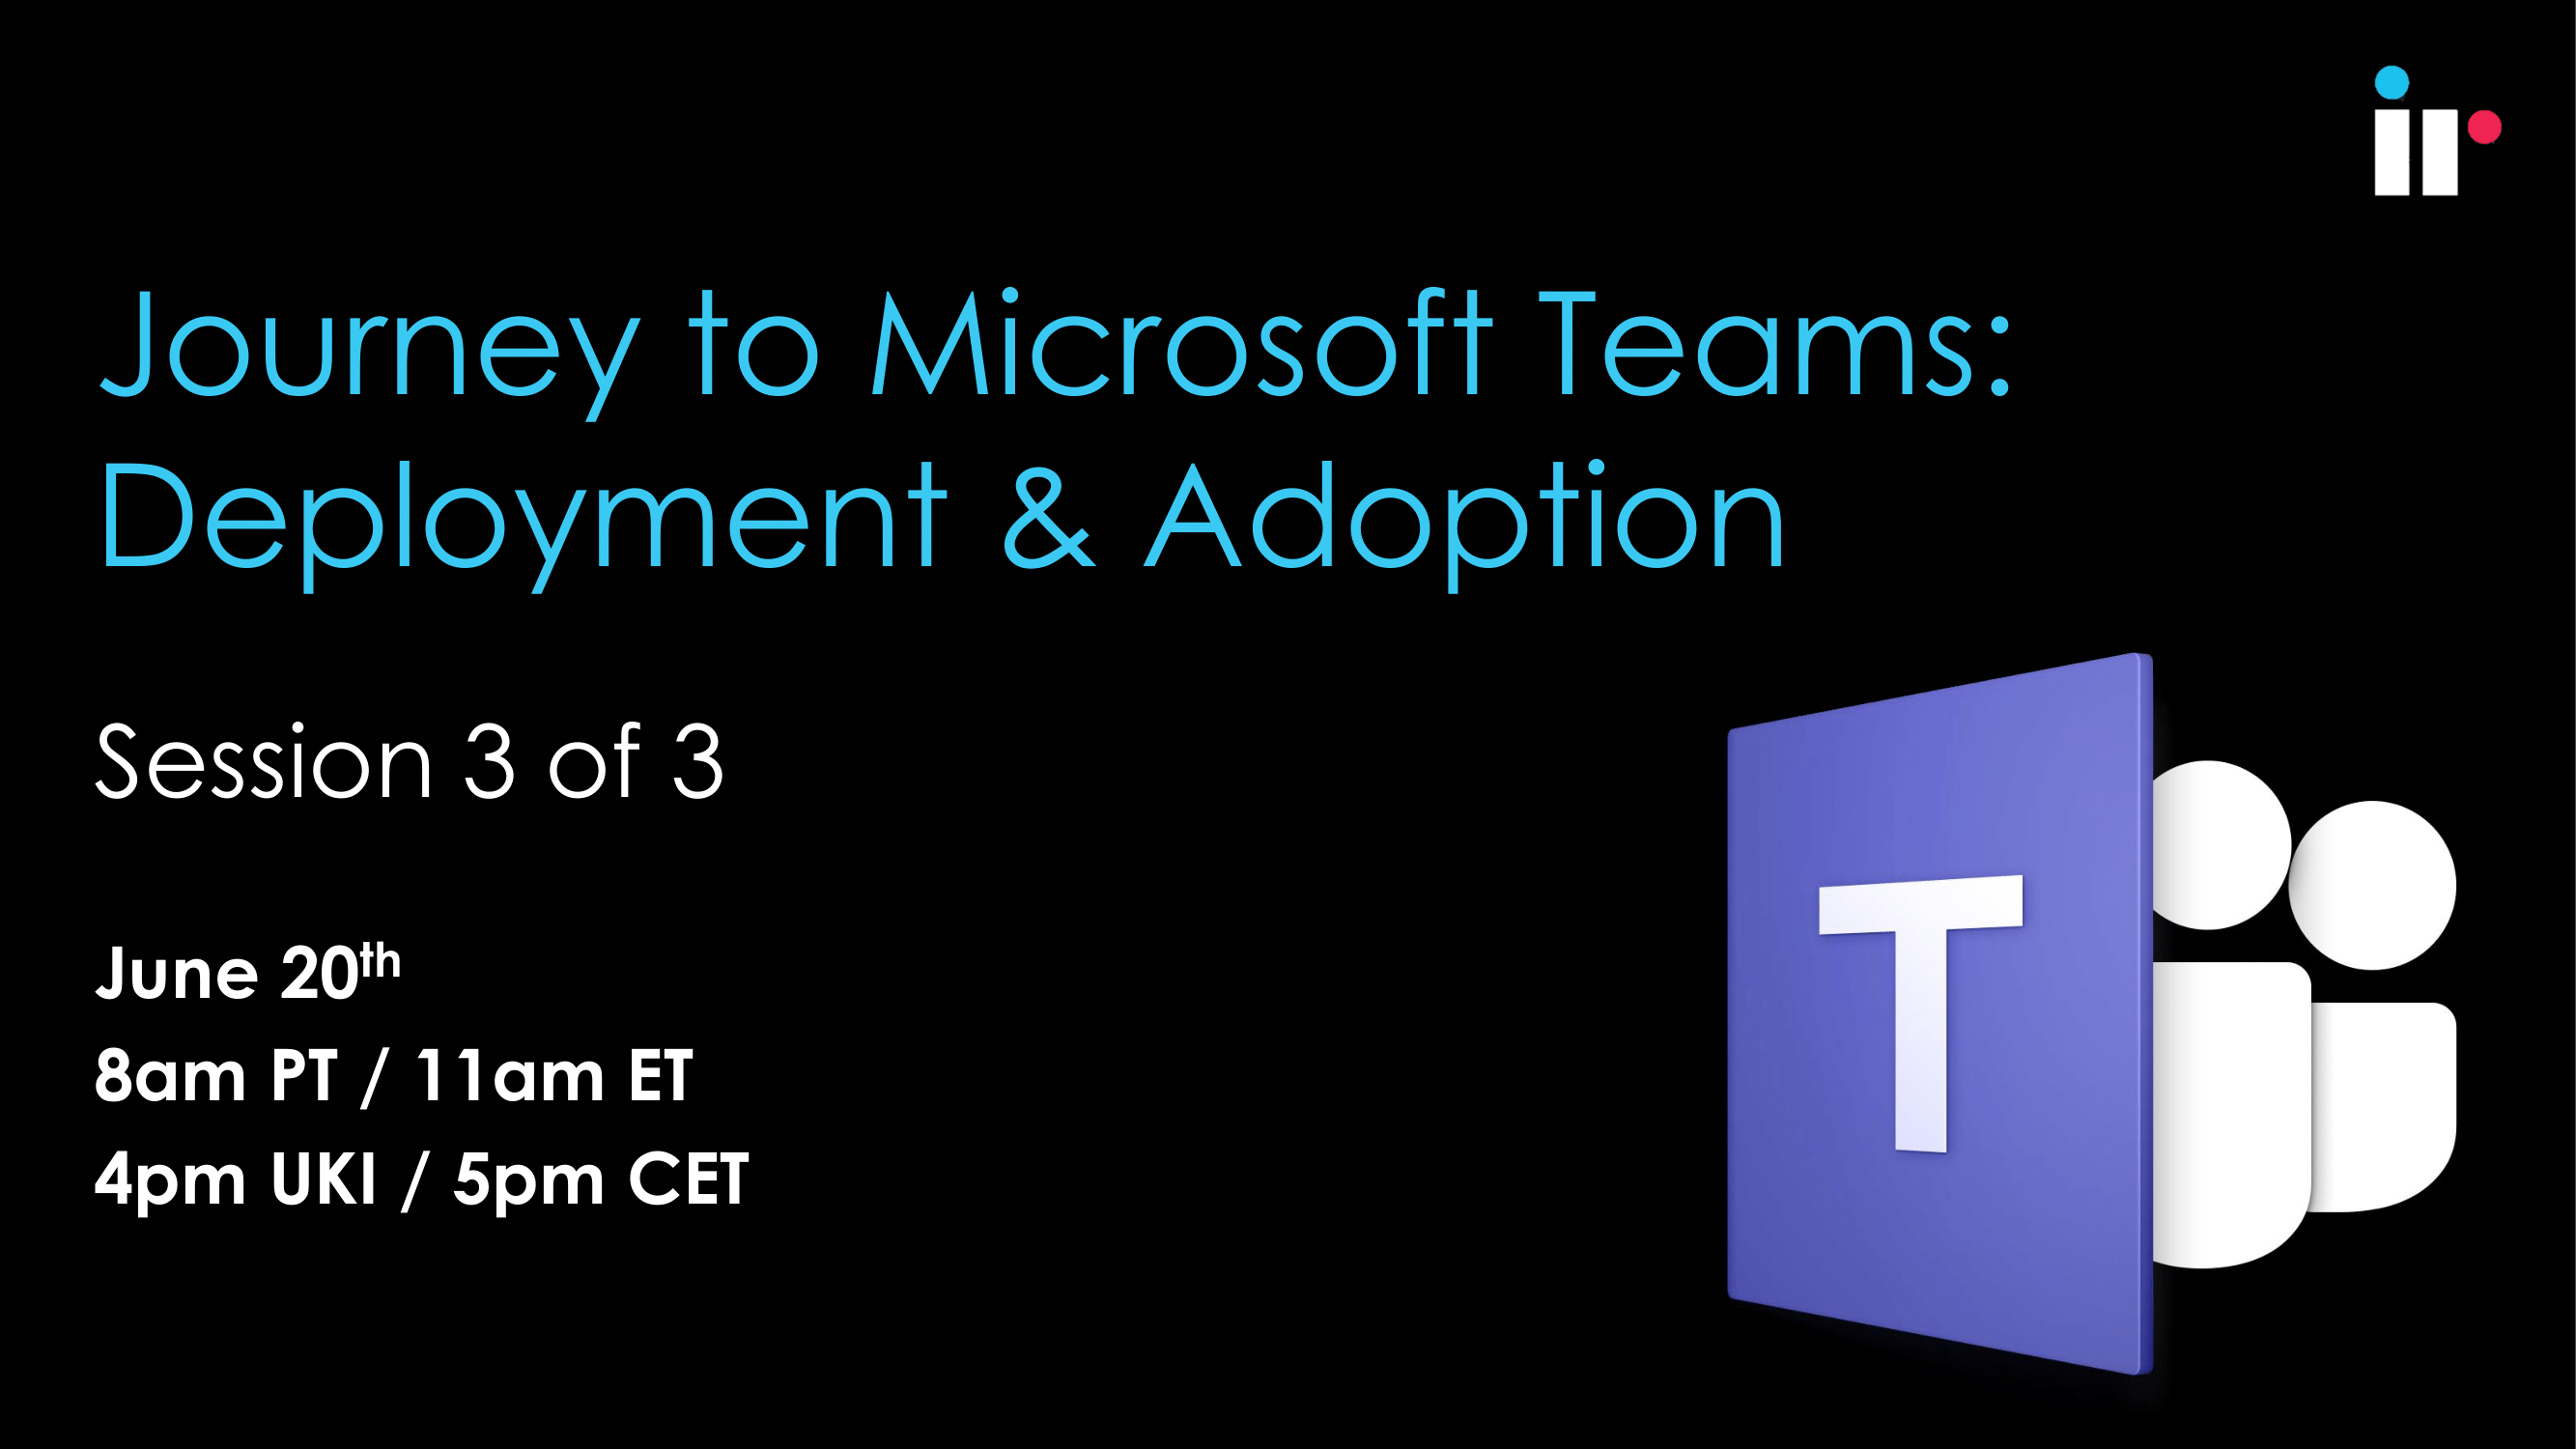 The Journey to Microsoft Teams - Deployment and Adoption Webinar